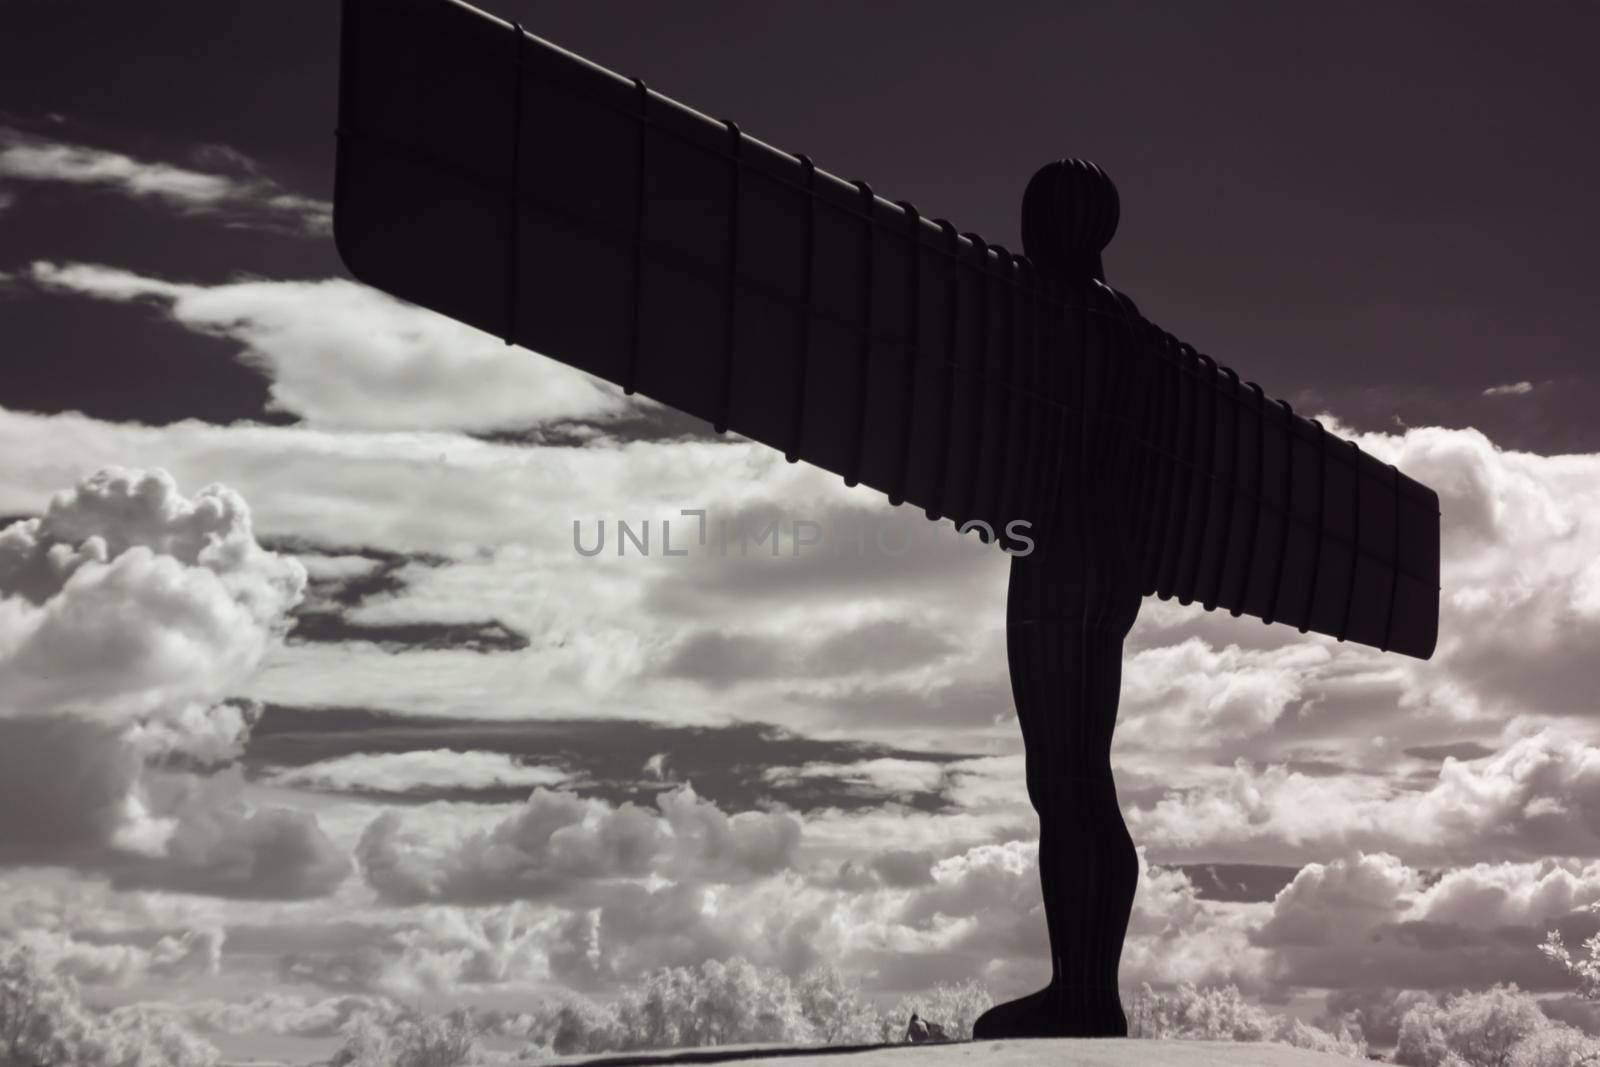 Infrared photo of the sculpture, Angel of the North, Gateshead, UK by StefanMal